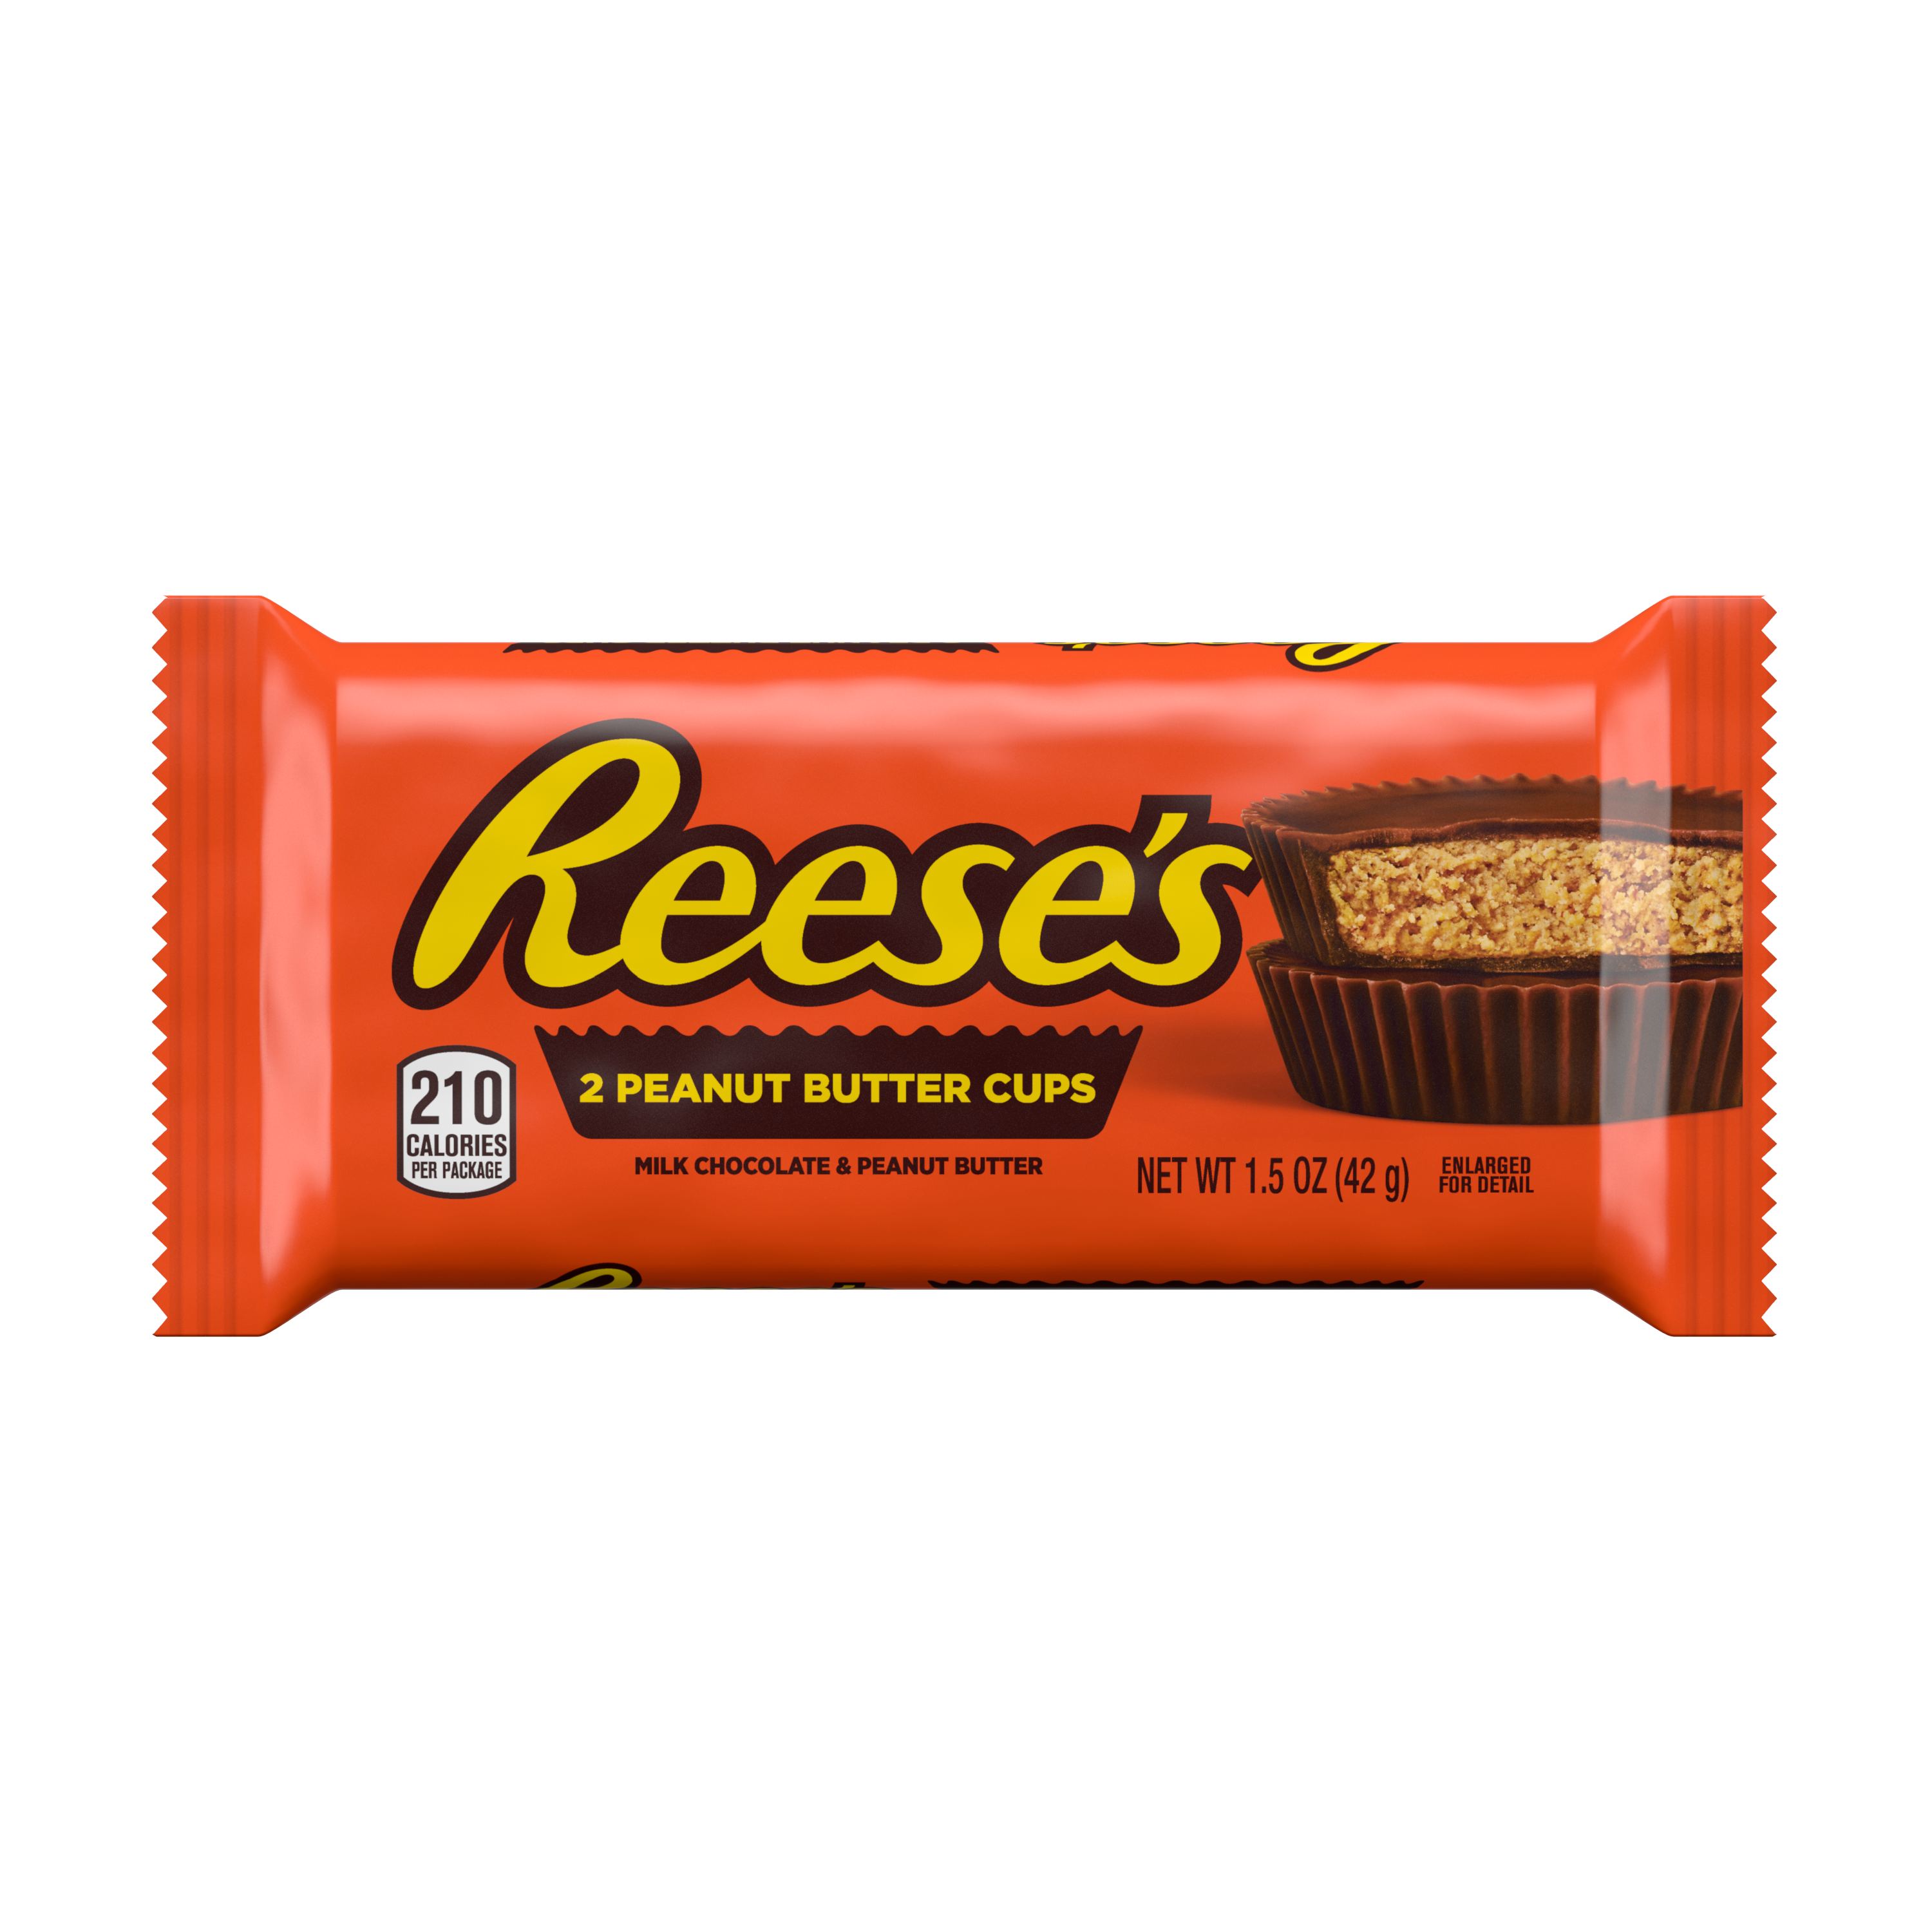 REESE'S Milk Chocolate Peanut Butter Cups, 1.5 oz - Front of Package